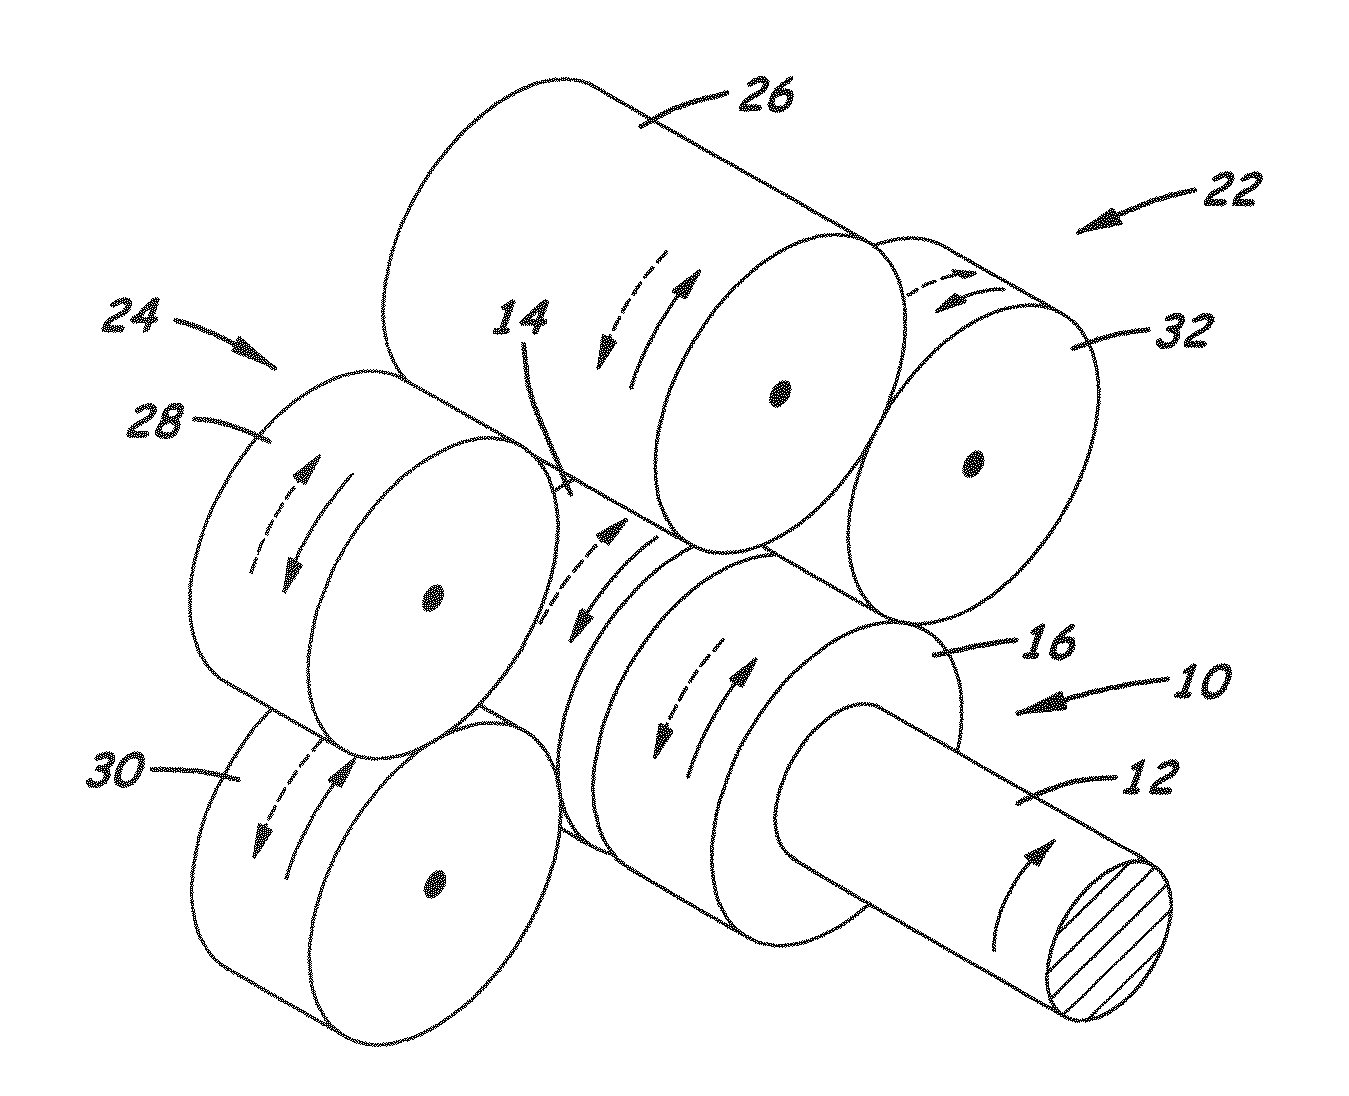 Drive conversion mechanism enabling constantly meshed gears in a drive input gear train